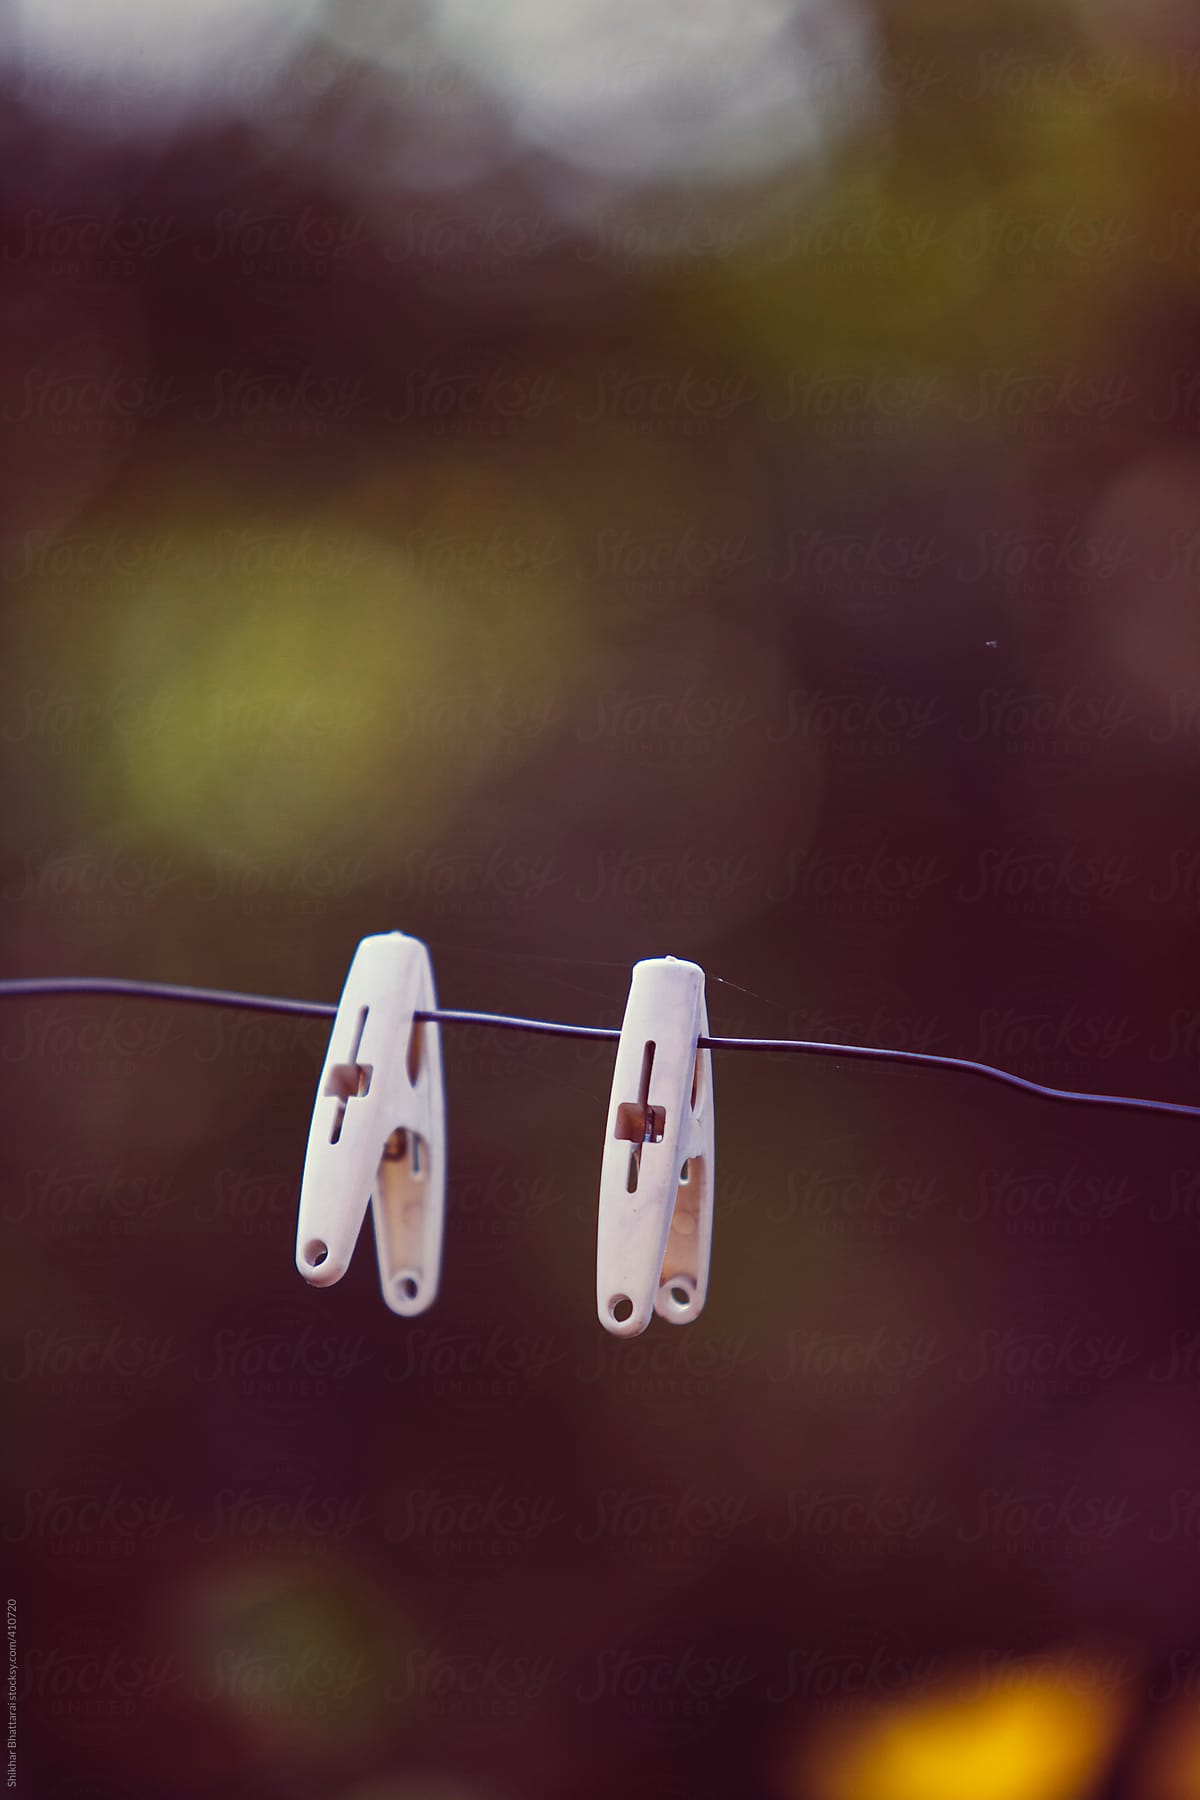 Pegs hanging on a clothes-line, eco-friendly laundry.